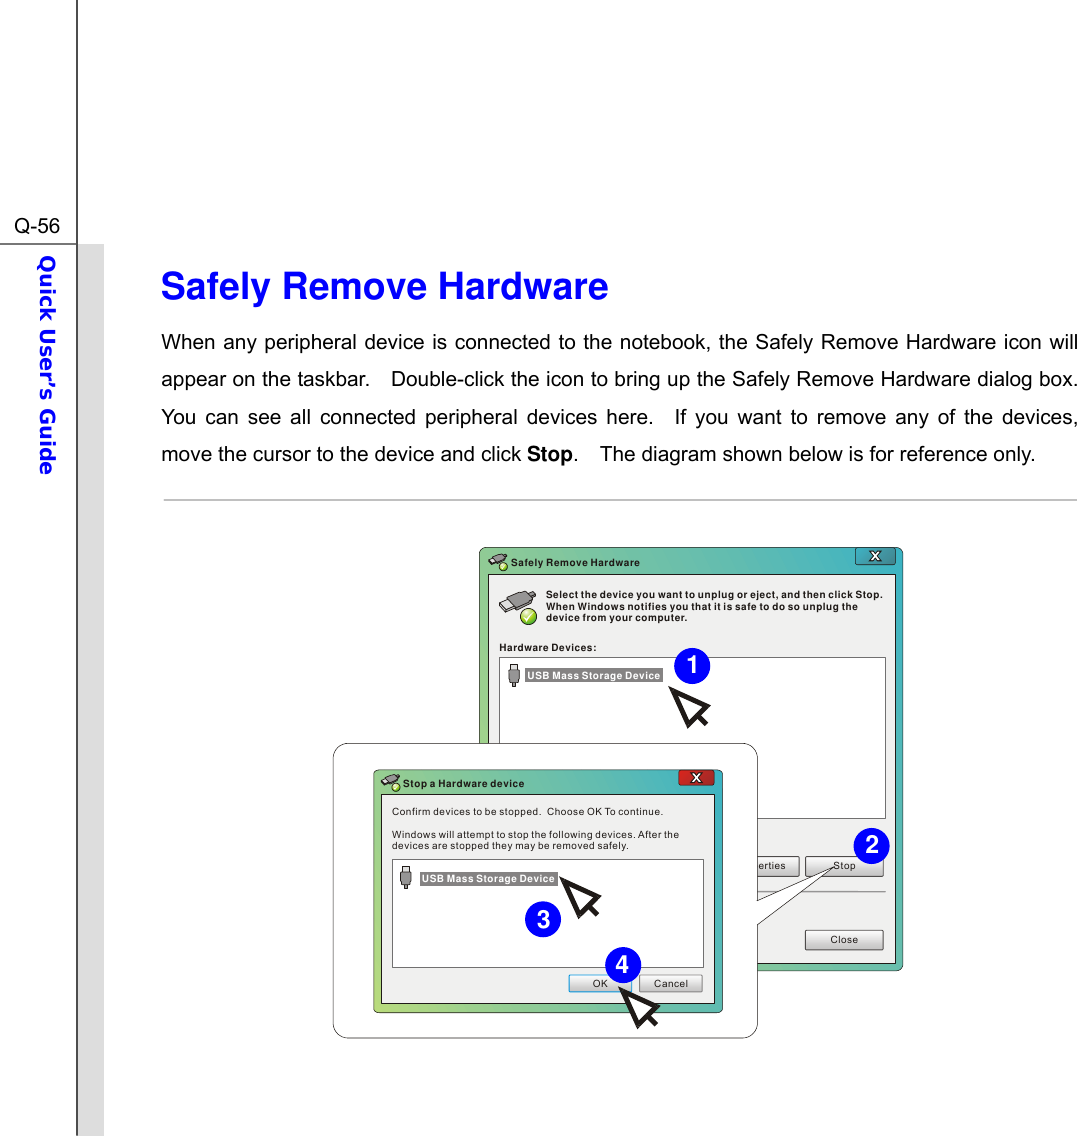  Q-56Quick User’s Guide  Safely Remove Hardware When any peripheral device is connected to the notebook, the Safely Remove Hardware icon will appear on the taskbar.    Double-click the icon to bring up the Safely Remove Hardware dialog box.   You can see all connected peripheral devices here.  If you want to remove any of the devices, move the cursor to the device and click Stop.    The diagram shown below is for reference only.  Select the device you want to unplug or eject, and then click Stop. When Windows notifies you that it is safe to do so unplug the device from your computer.Hardware Devices:Properties StopCloseSafely Remove HardwareConfirm devices to be stopped.  Choose OK To continue.Windows will attempt to stop the following devices. After the devices are stopped they may be removed safely.OK CancelStop a Hardware deviceUSB Mass Storage DeviceUSB Mass Storage Device  4312